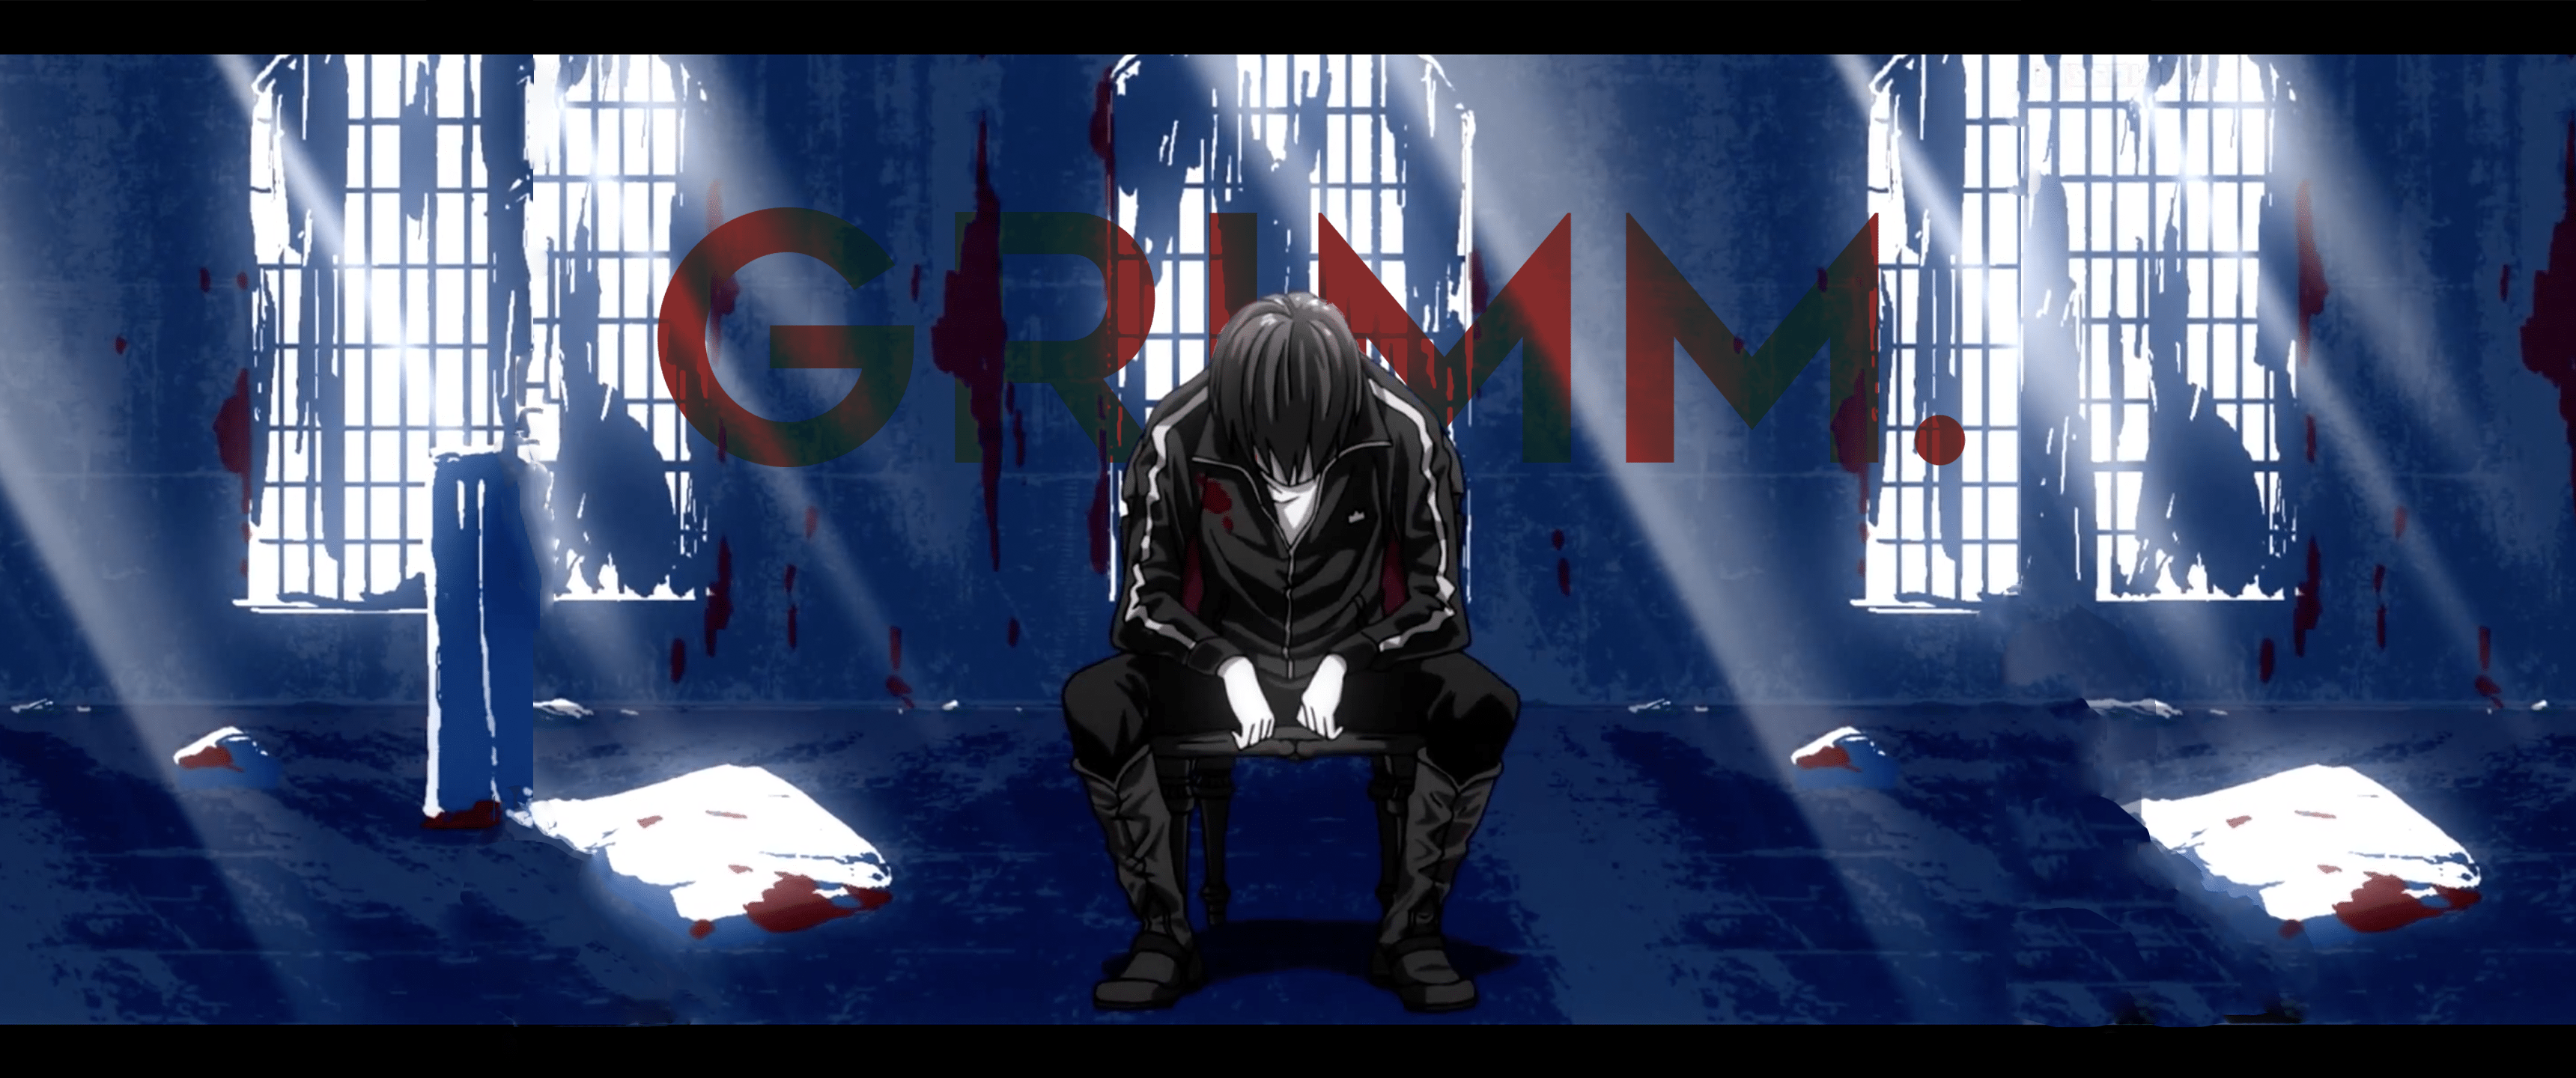 3440x1440 Anime Wallpapers Top Free 3440x1440 Anime Backgrounds